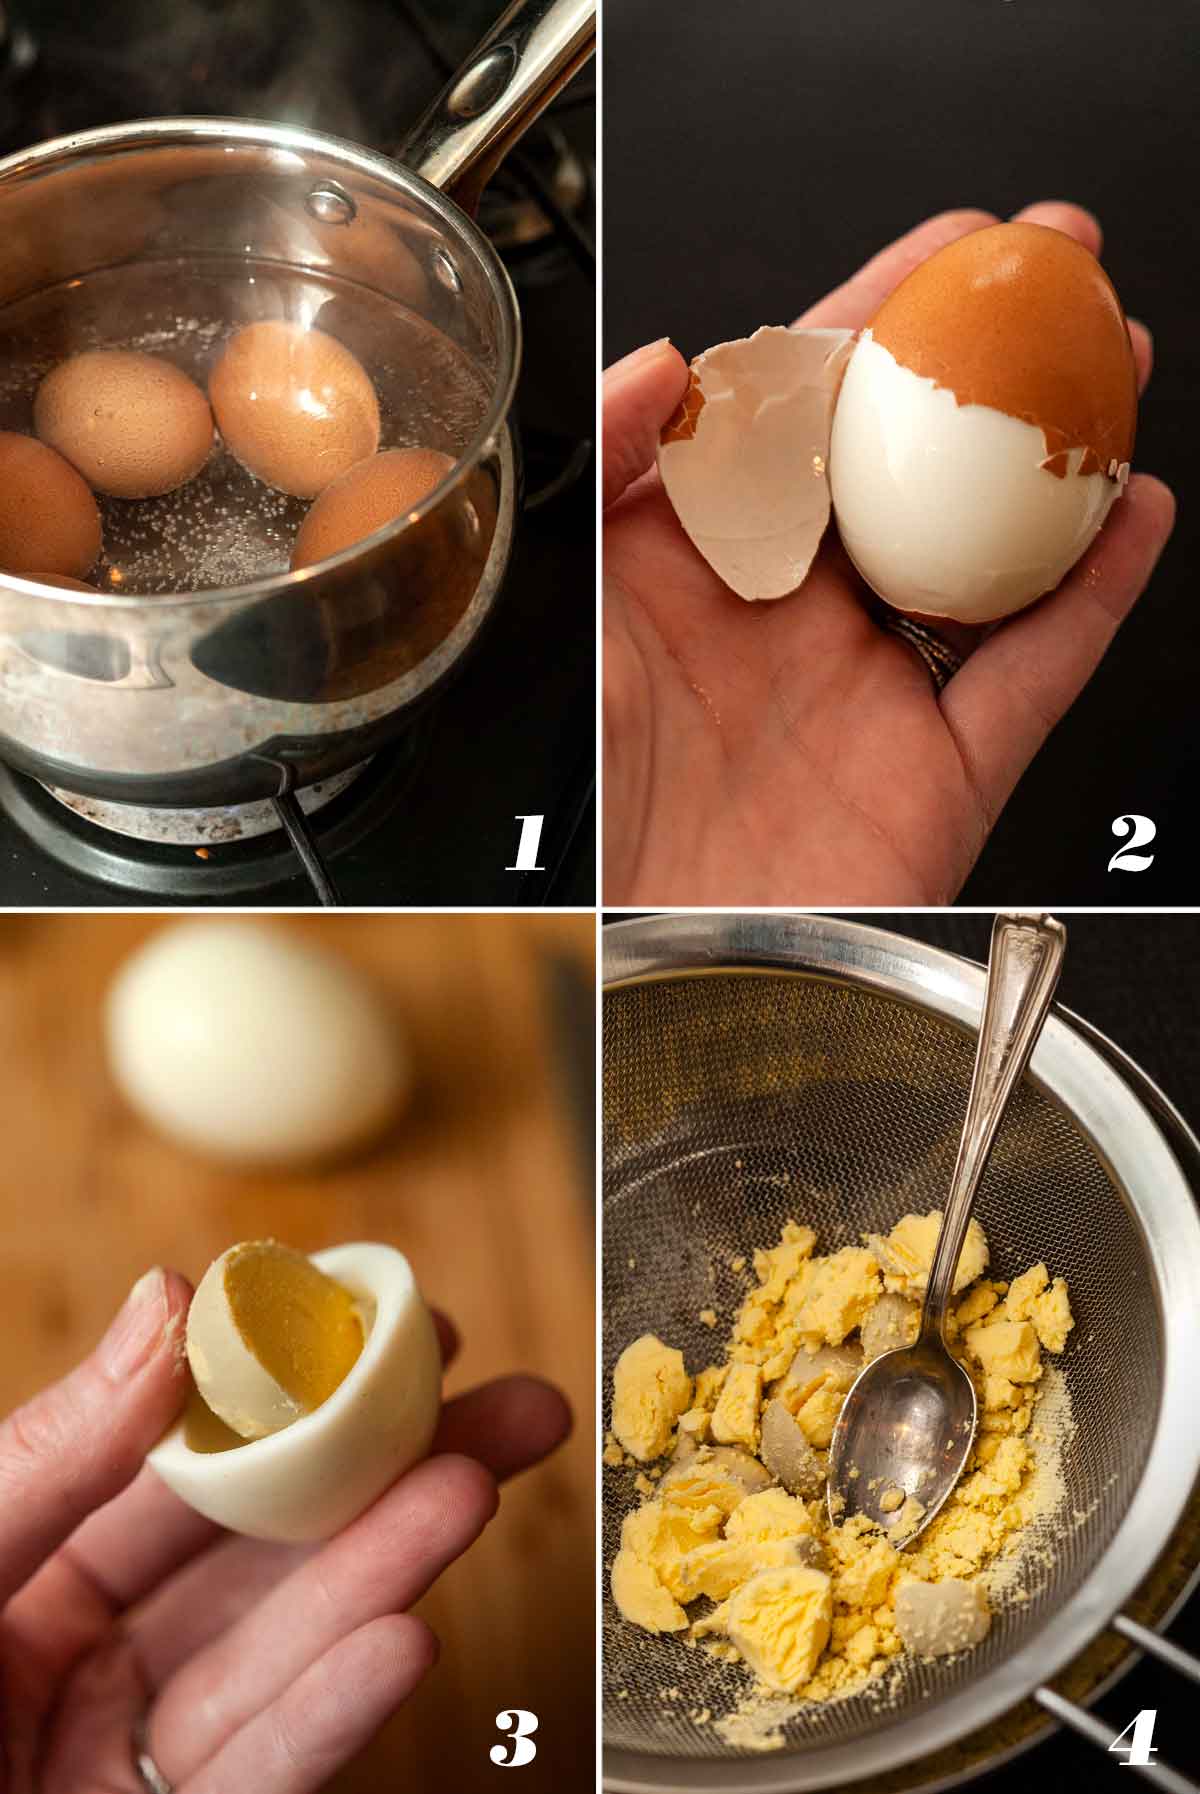 A collage of 4 numbered images showing how to make deviled eggs.